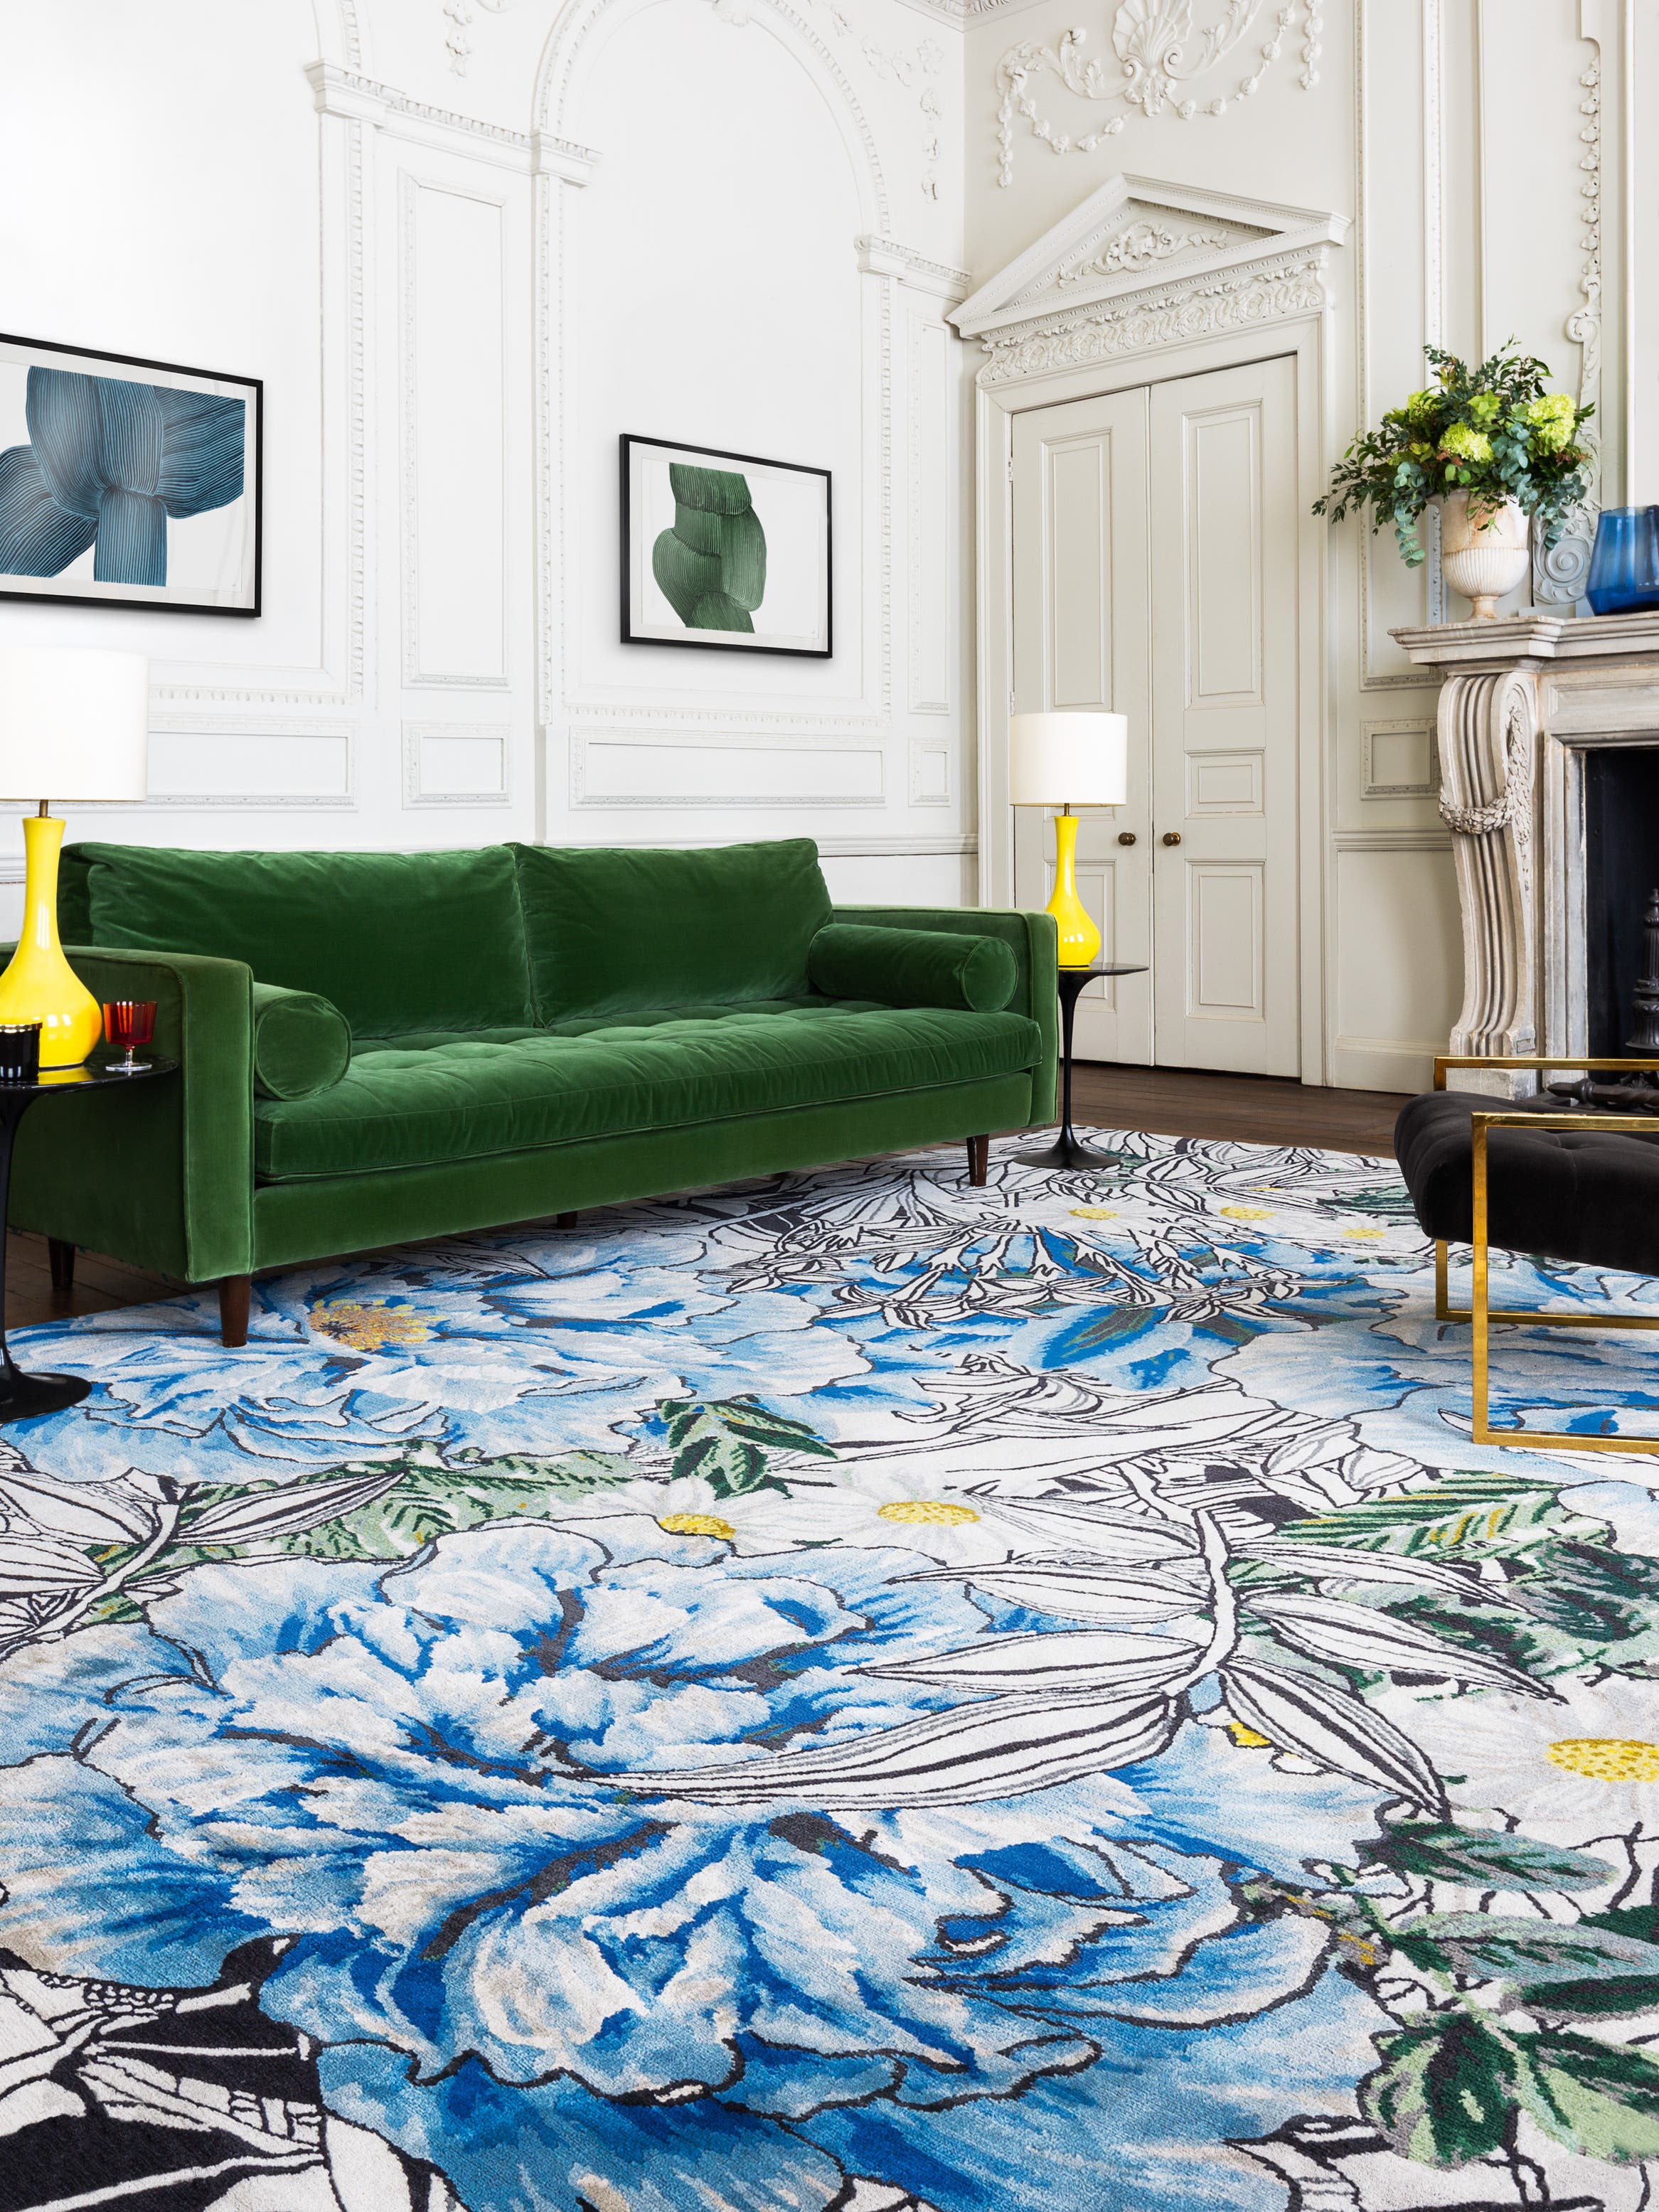 blue floral rug and green sofa